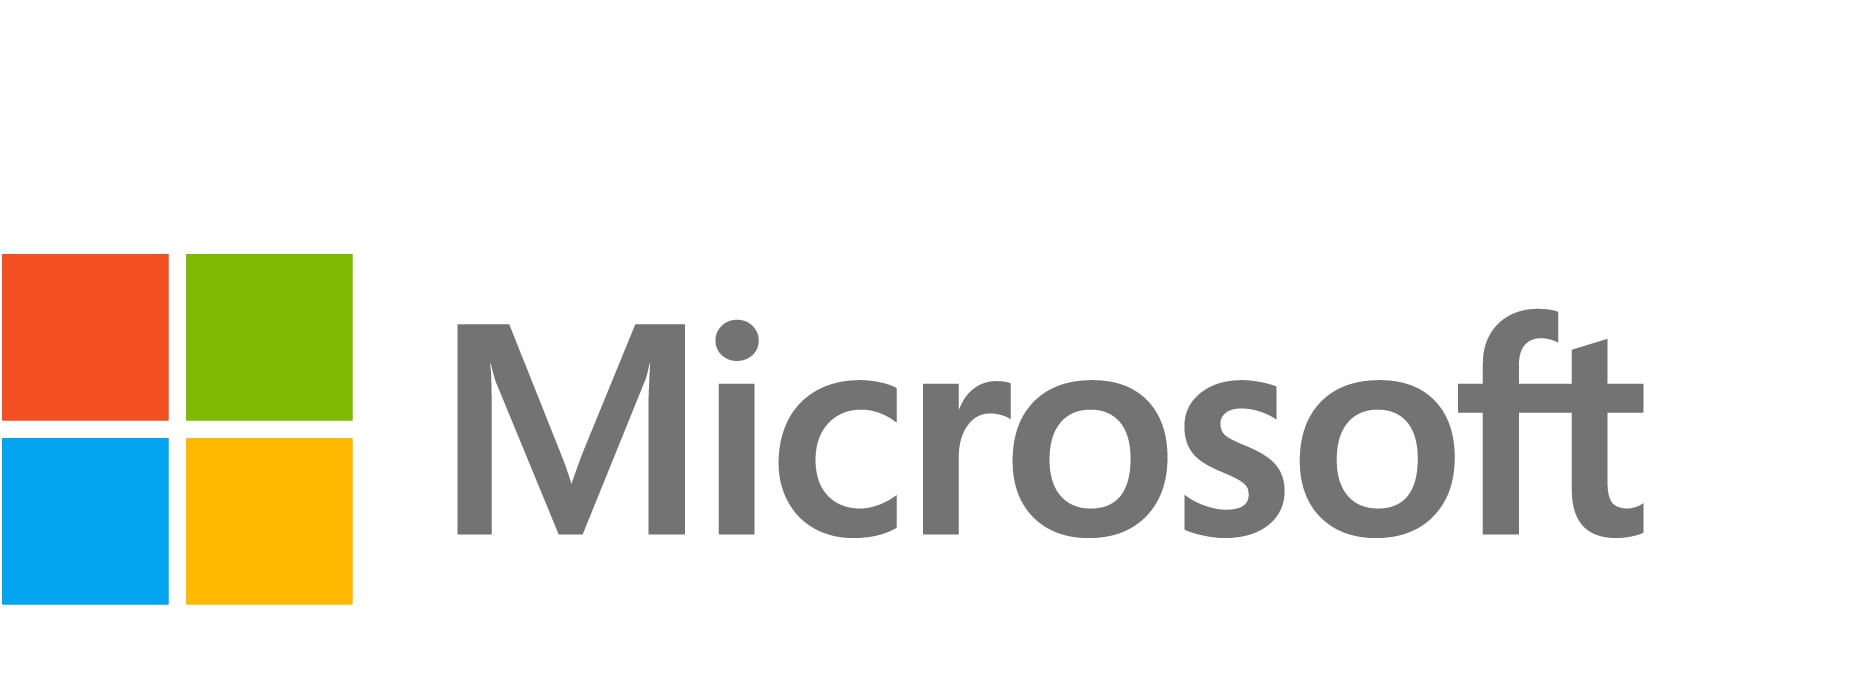 Microsoft Entra ID P1 Students use benefit - subscription license (1 month)